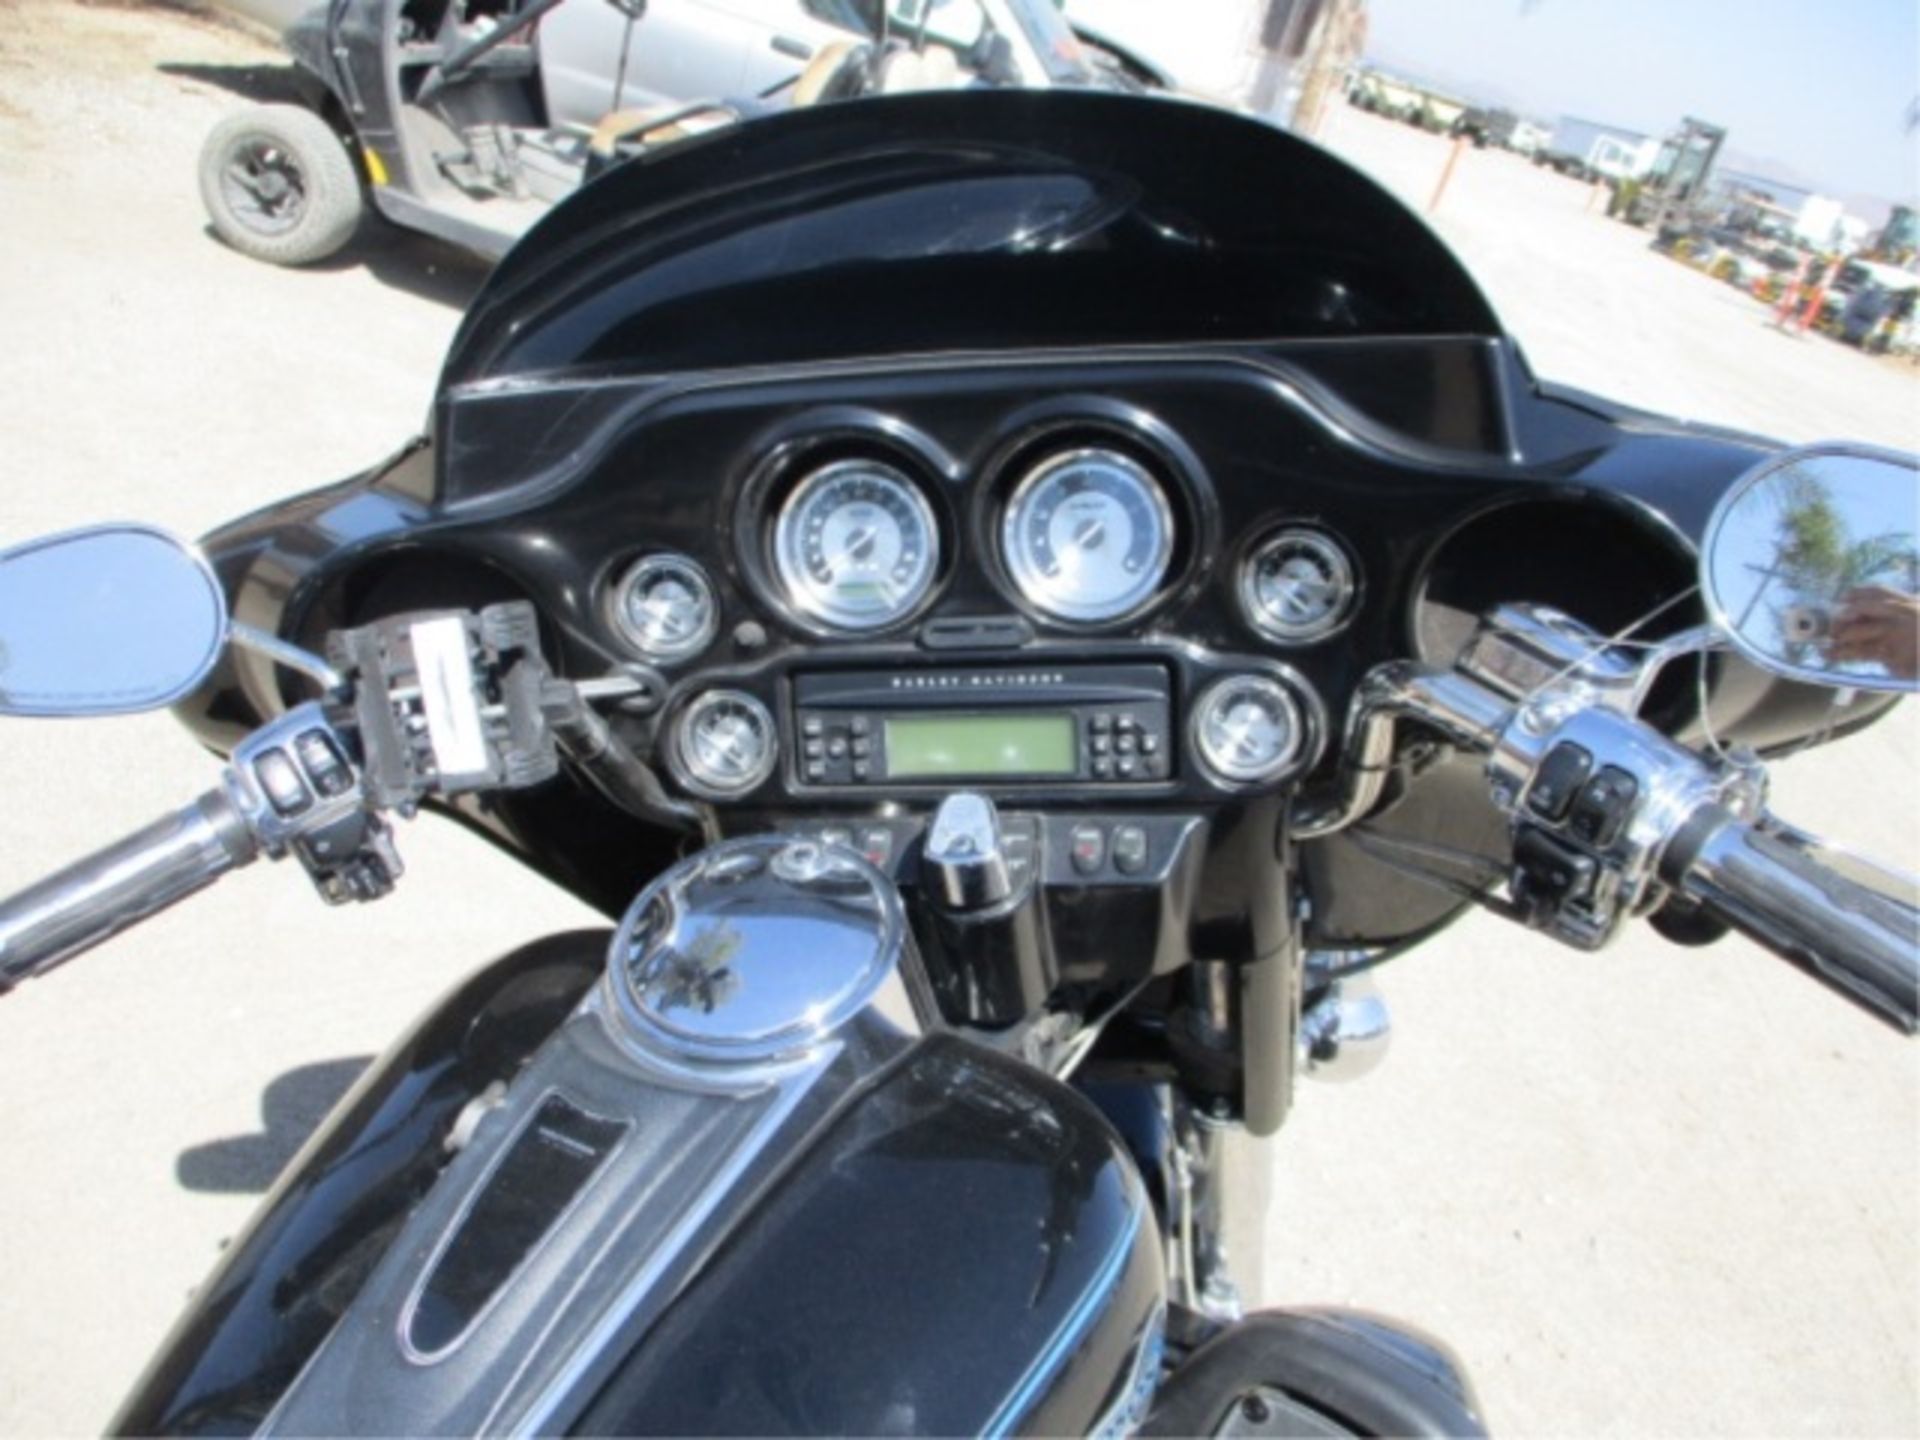 2006 Harley Davidson Electra Glide Motor Cycle, Ultra Classic, 1450cc Gas, External Speakers, - Image 17 of 44